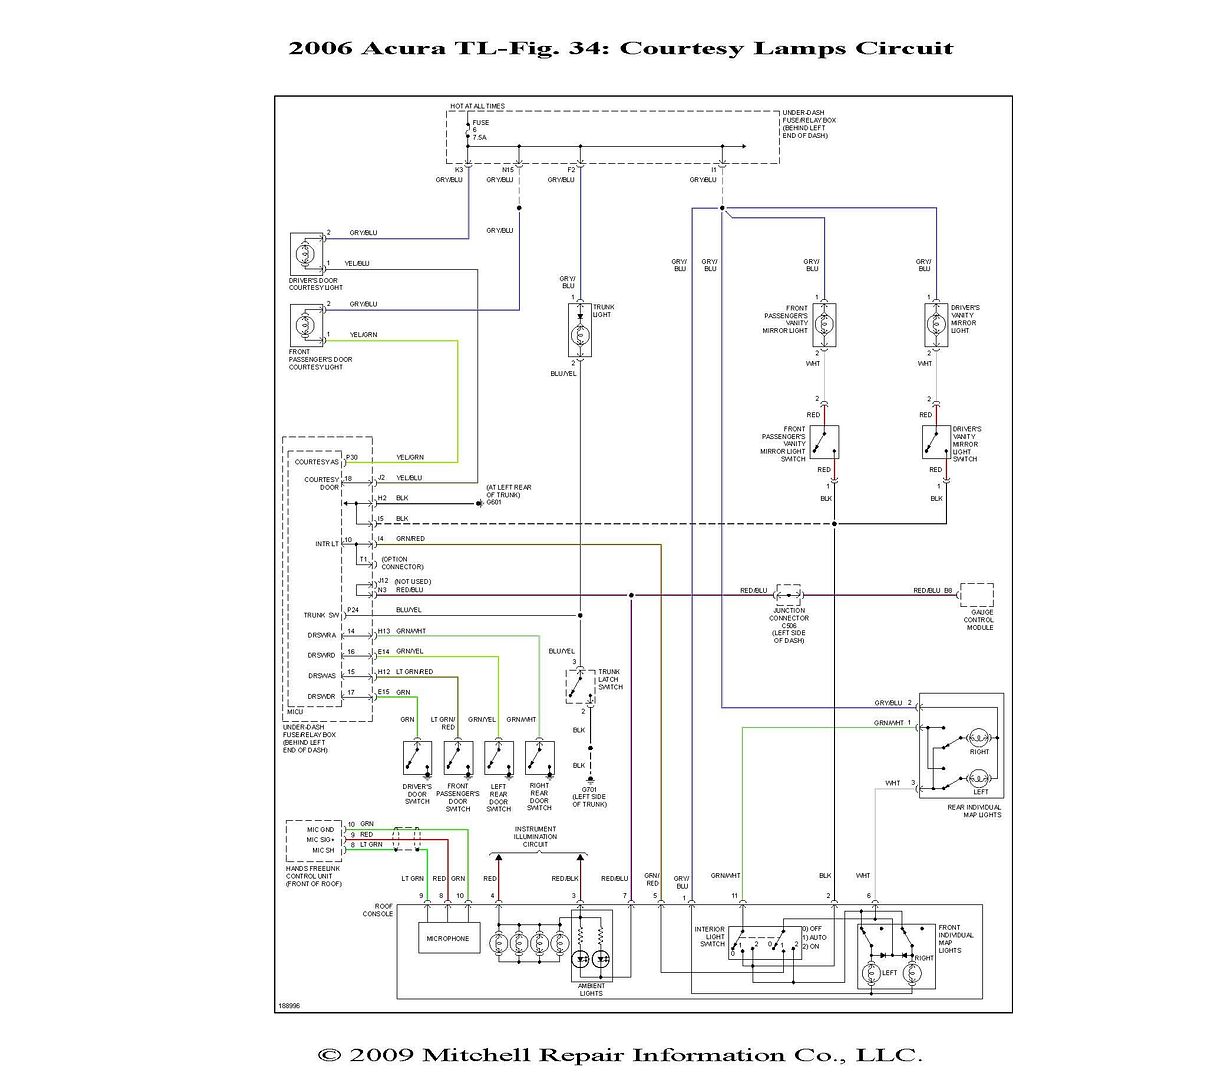 2001 Acura Cl Wiring Diagram - Here Is A Wiring Diagram For The Lighting Section Of Your  Tl Also If You Need To Check The Cel I Have A Obd Scanner That Can Read It For You - 2001 Acura Cl Wiring Diagram